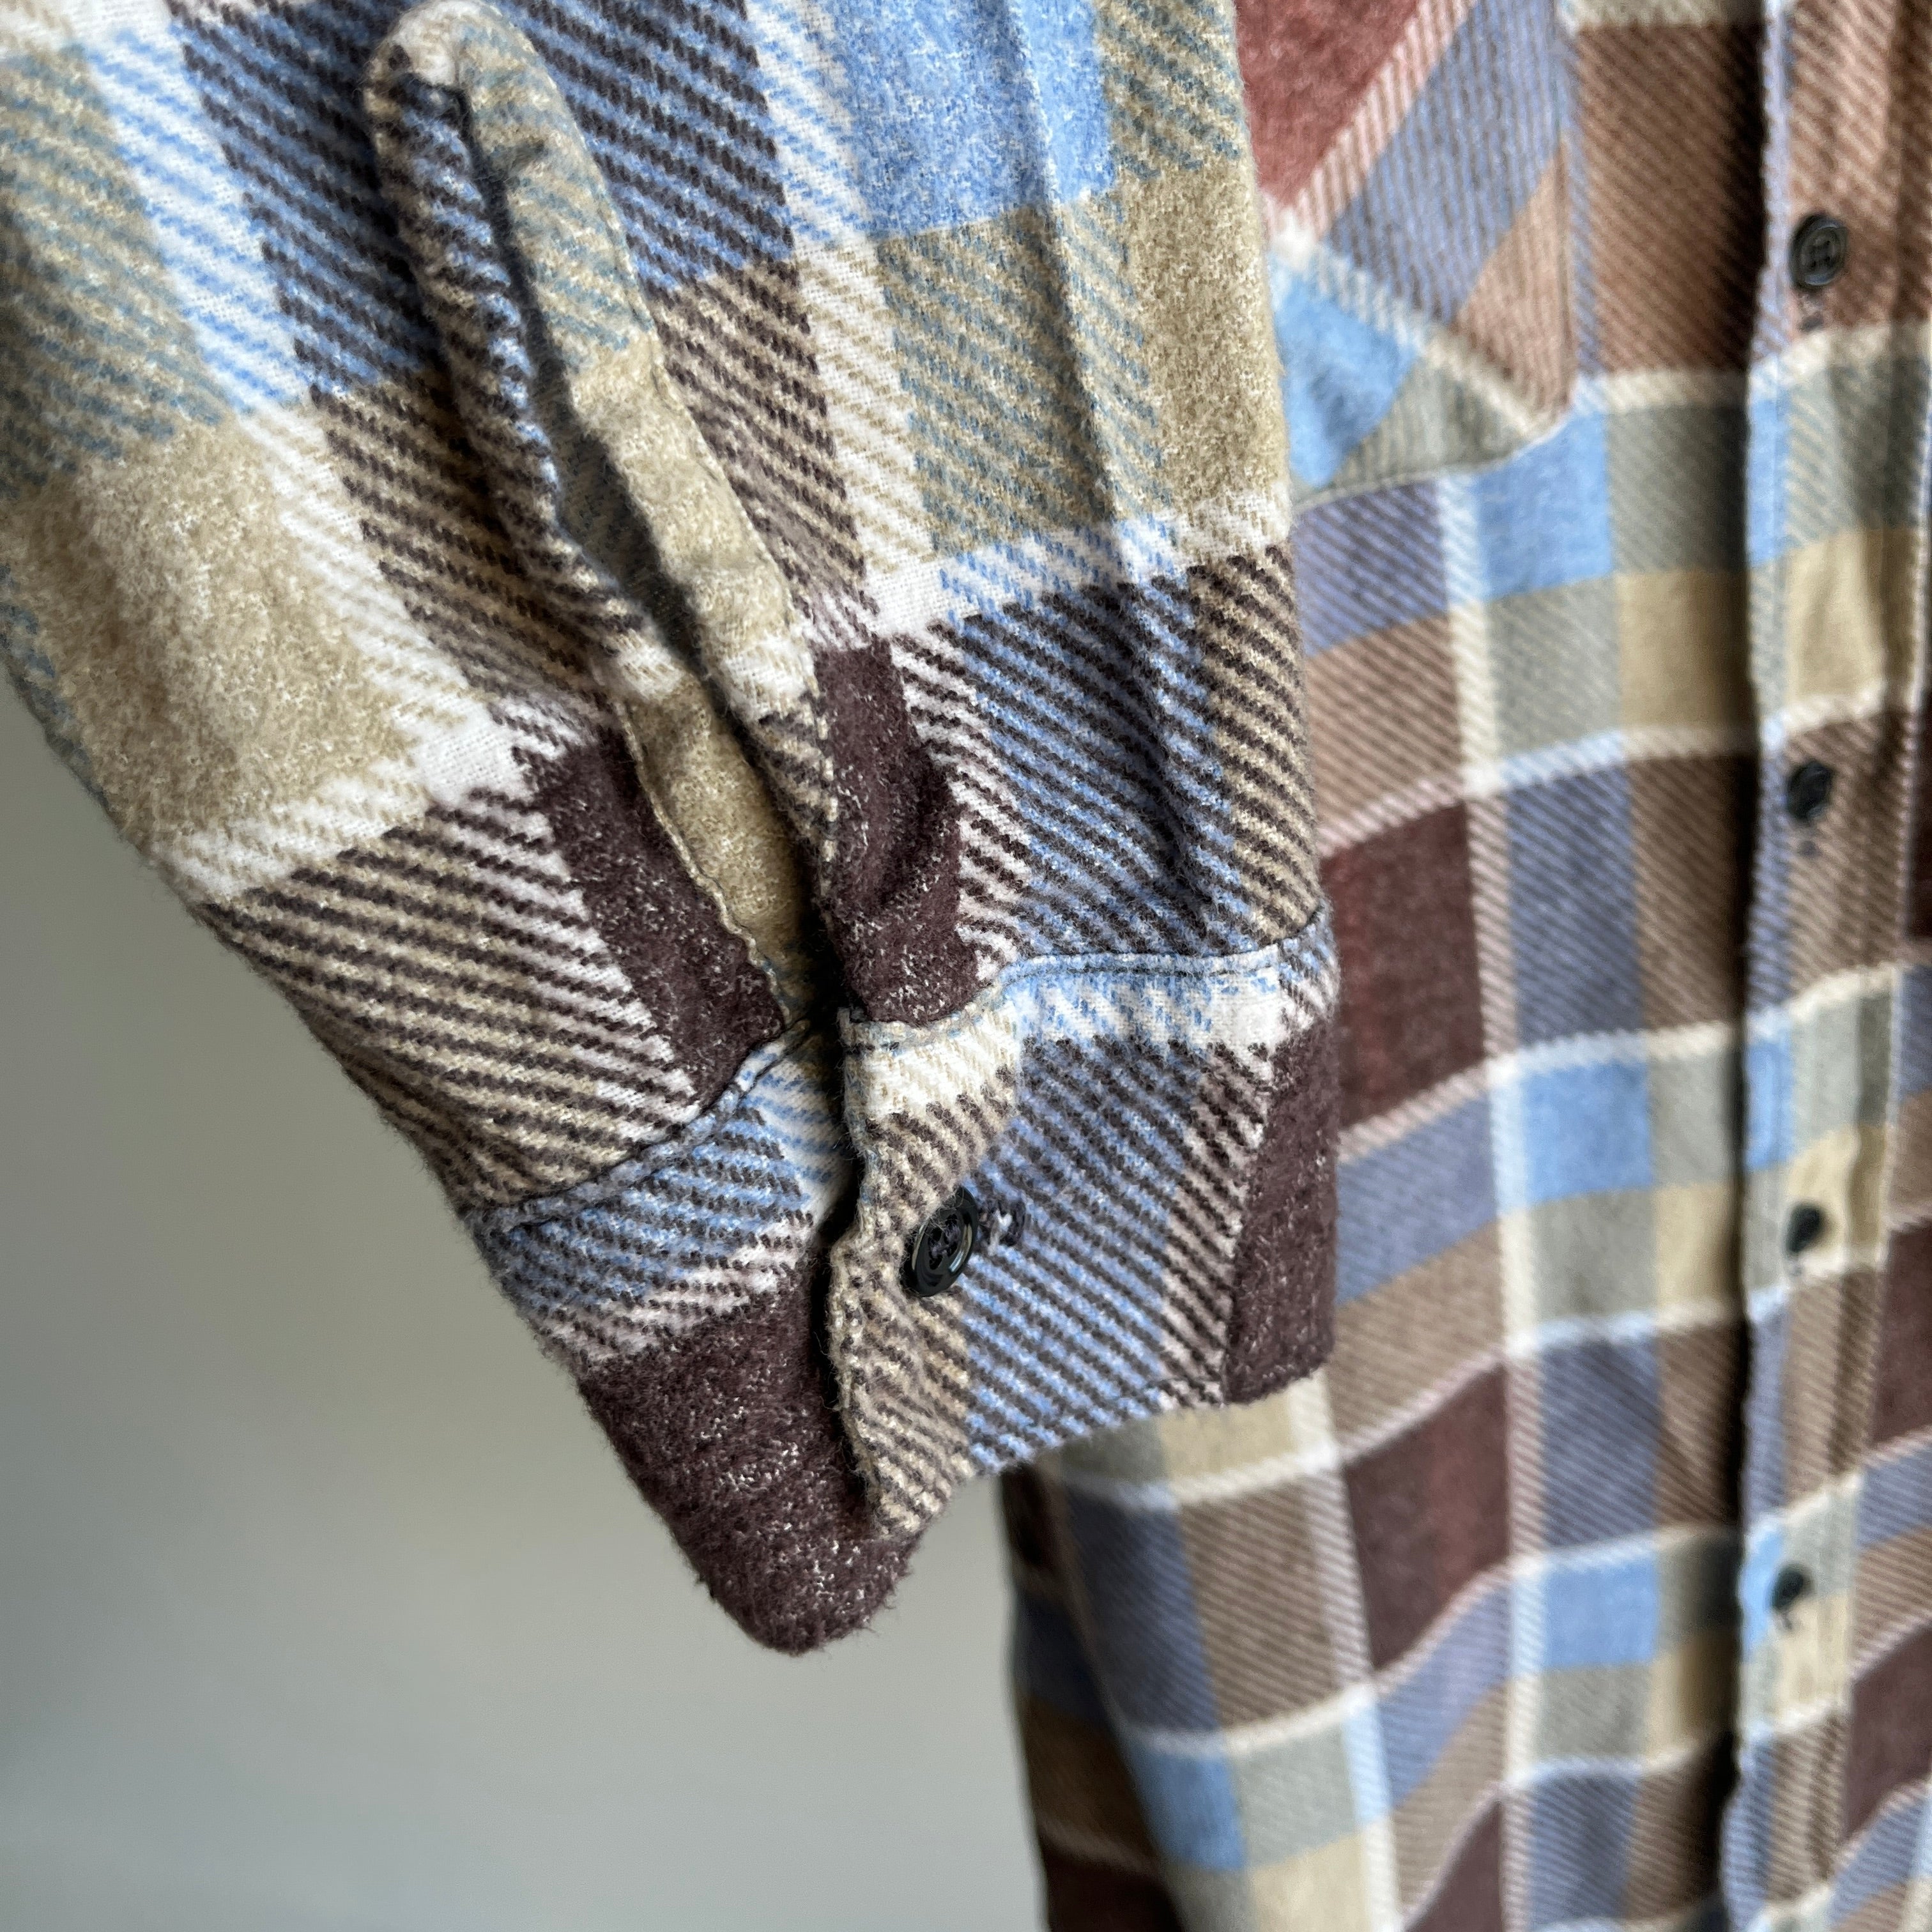 1980/90s Lightweight Longer Single Sided Soft Five Brothers Flannel